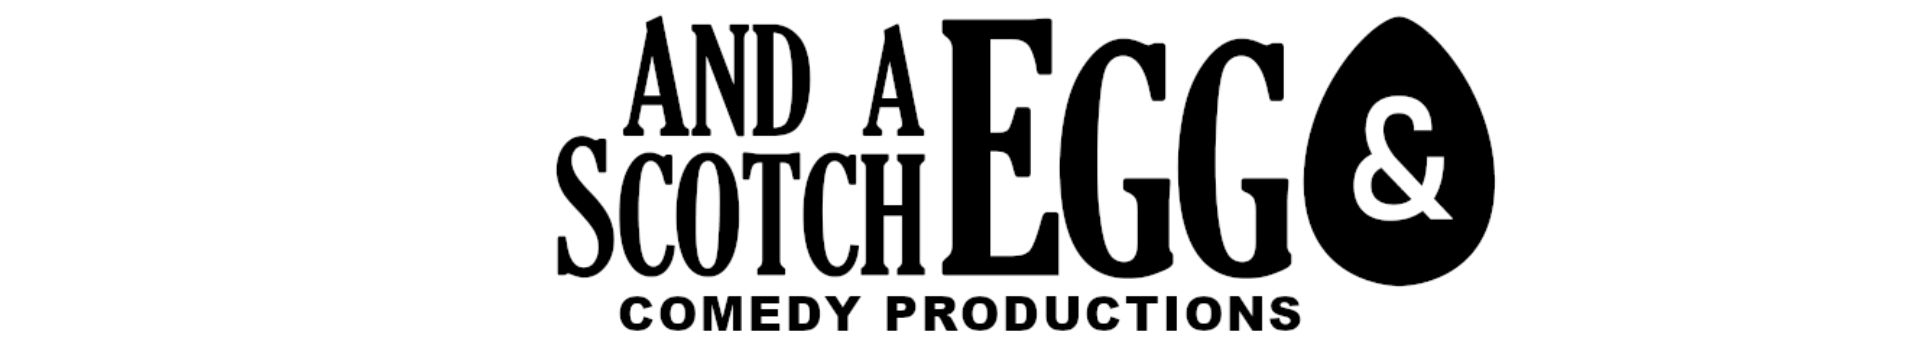 And a Scotch Egg Comedy Productions Banner